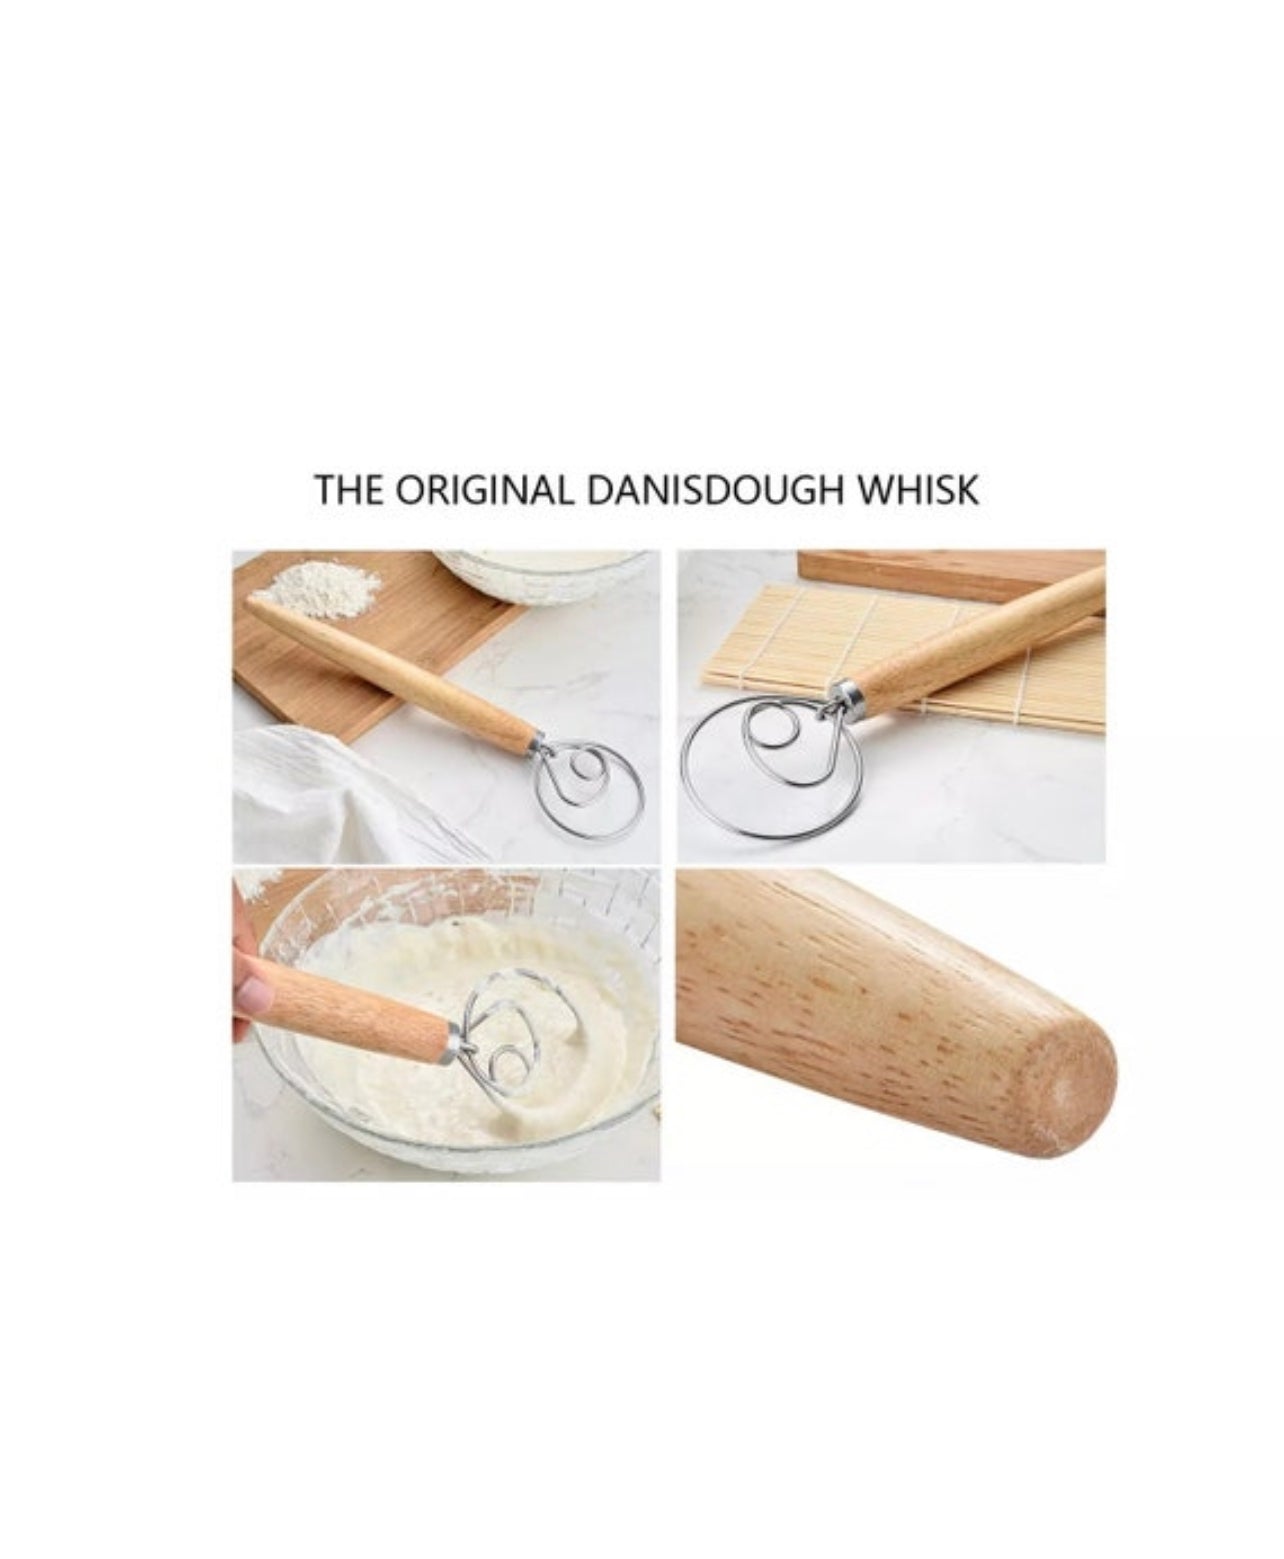 What Is a Dough Whisk?